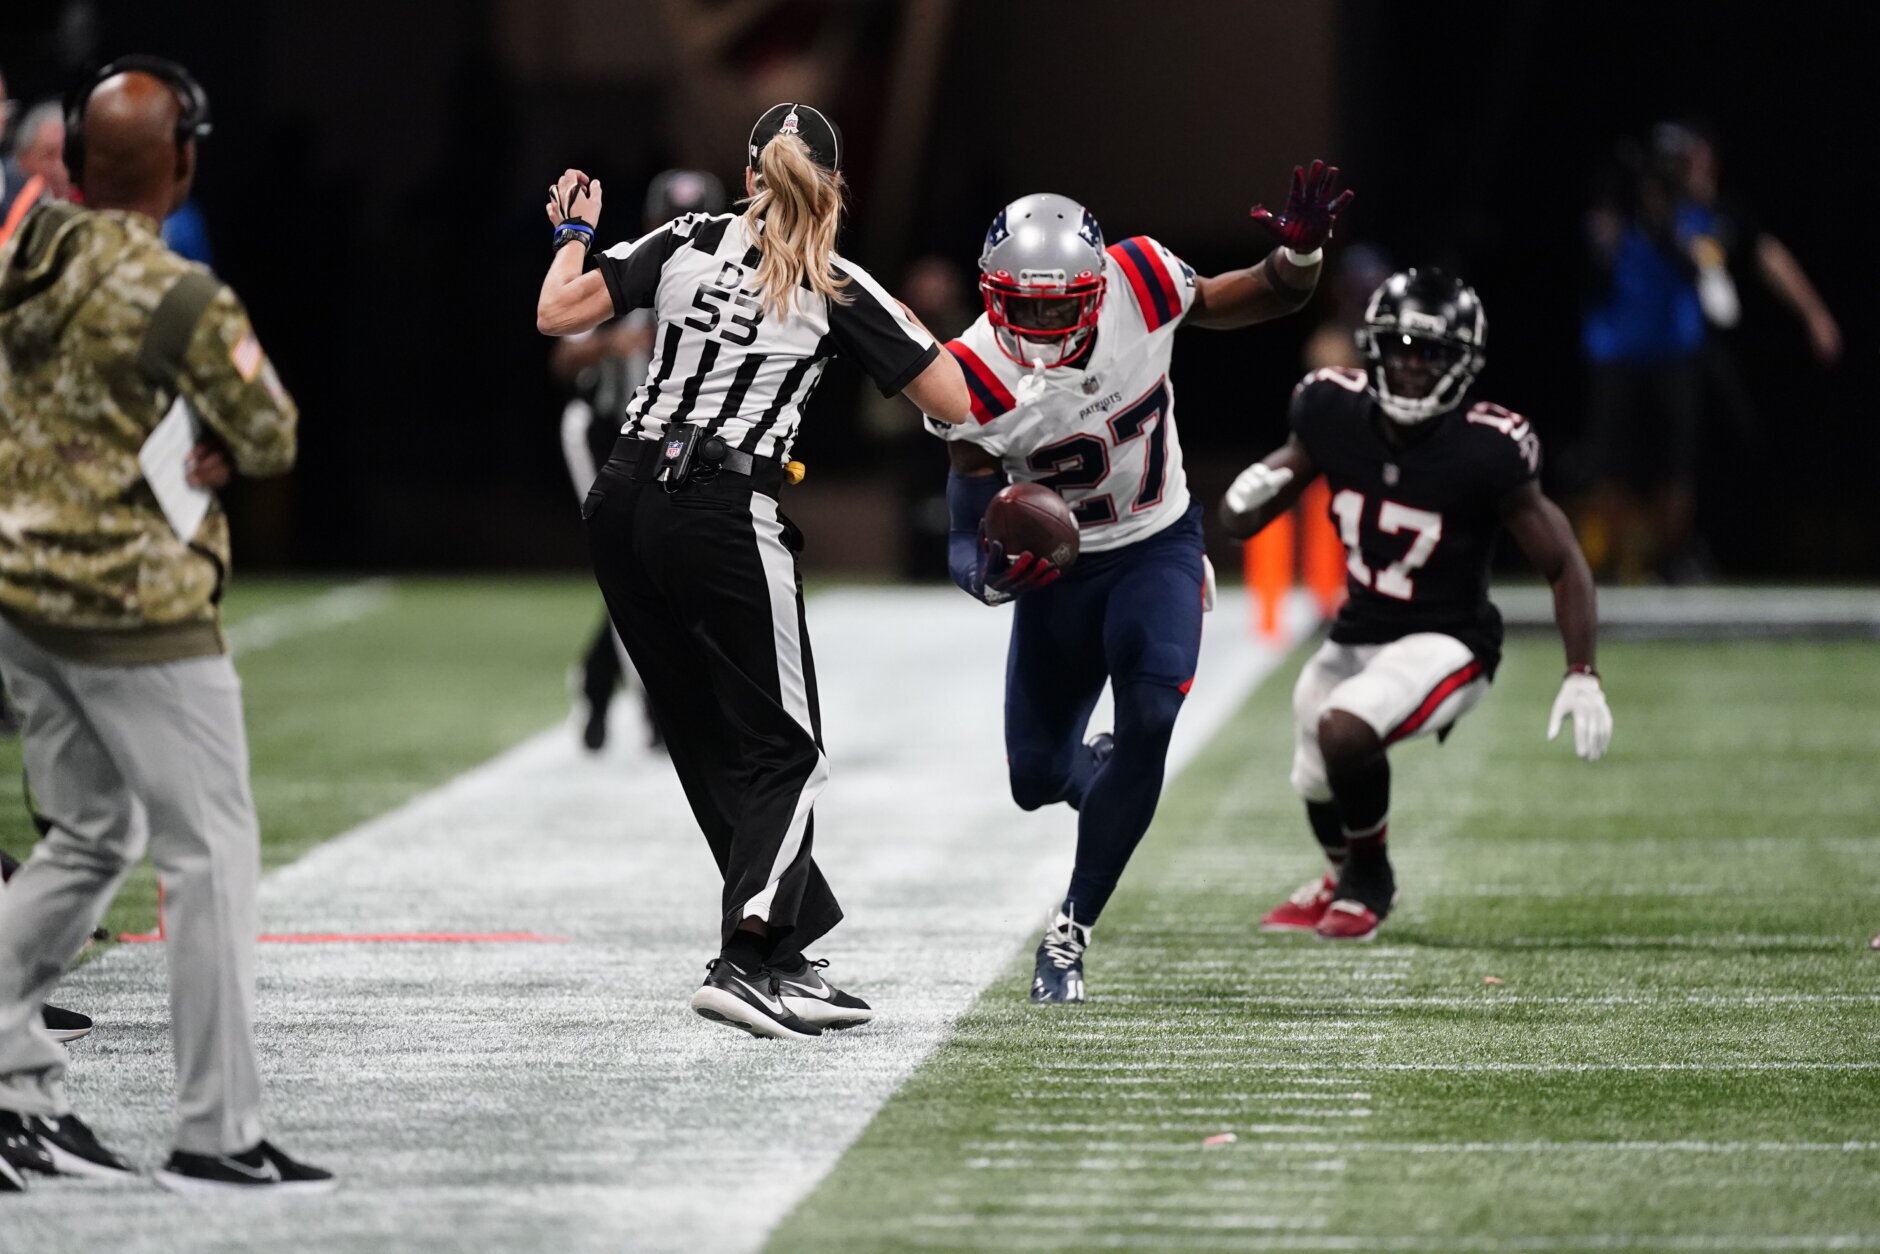 <p><em><strong>Patriots 25</strong></em><br />
<em><strong>Falcons 0</strong></em></p>
<p>As if the infamous Super Bowl loss after a 28-3 lead weren&#8217;t misery enough, New England came into Atlanta and handed the Falcons their first home shutout loss in 33 years. It looks like the Patriots defense won&#8217;t let this team fade into irrelevance just yet. Damn it.</p>
